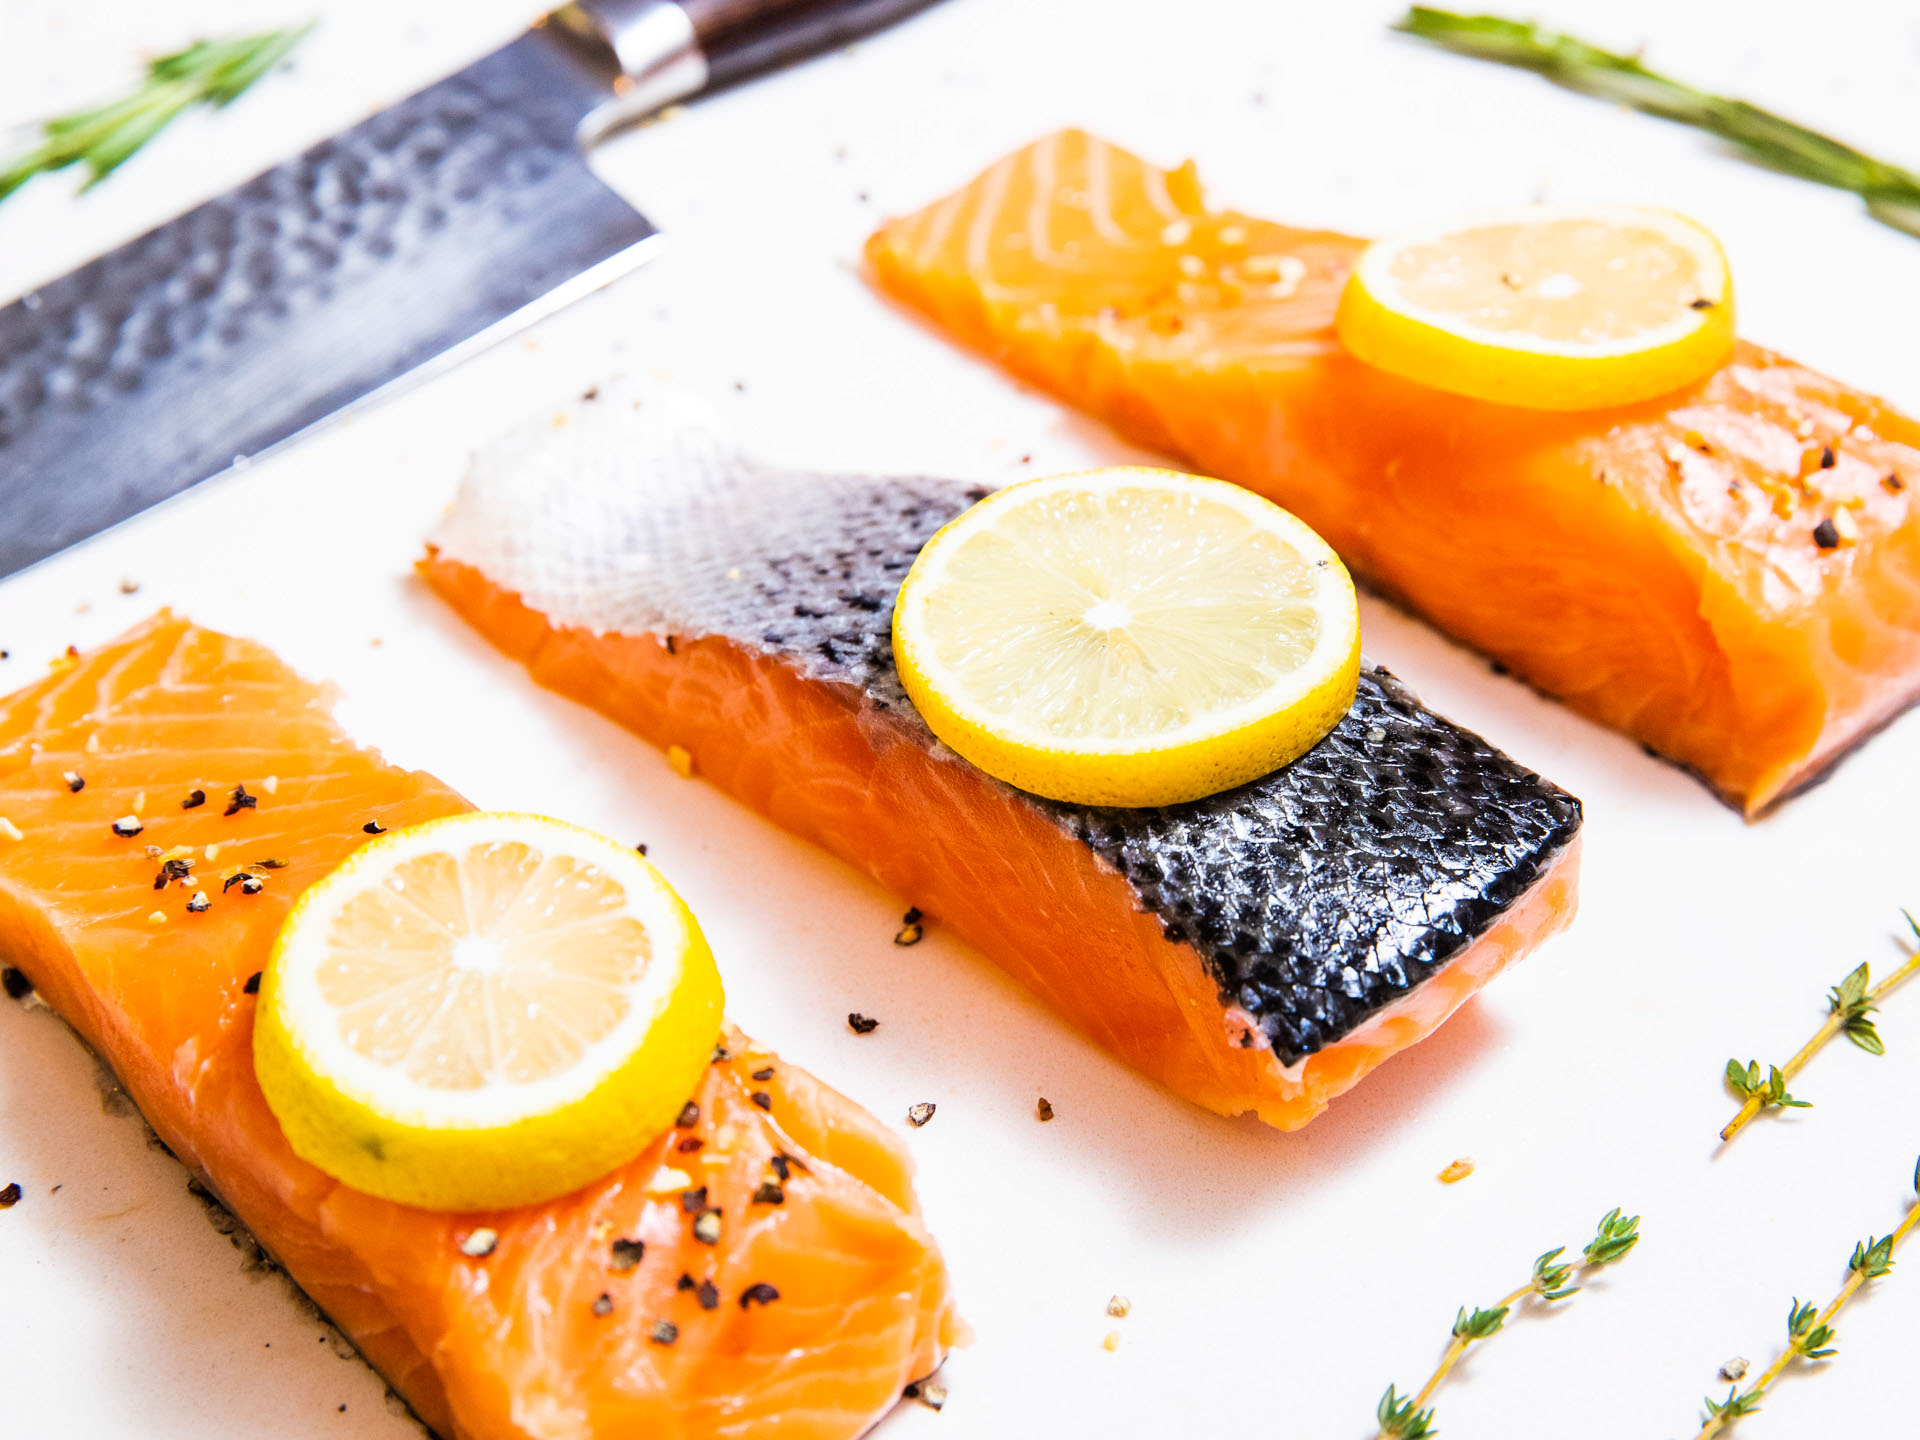 Salmon filets with lemon slices and herbs.